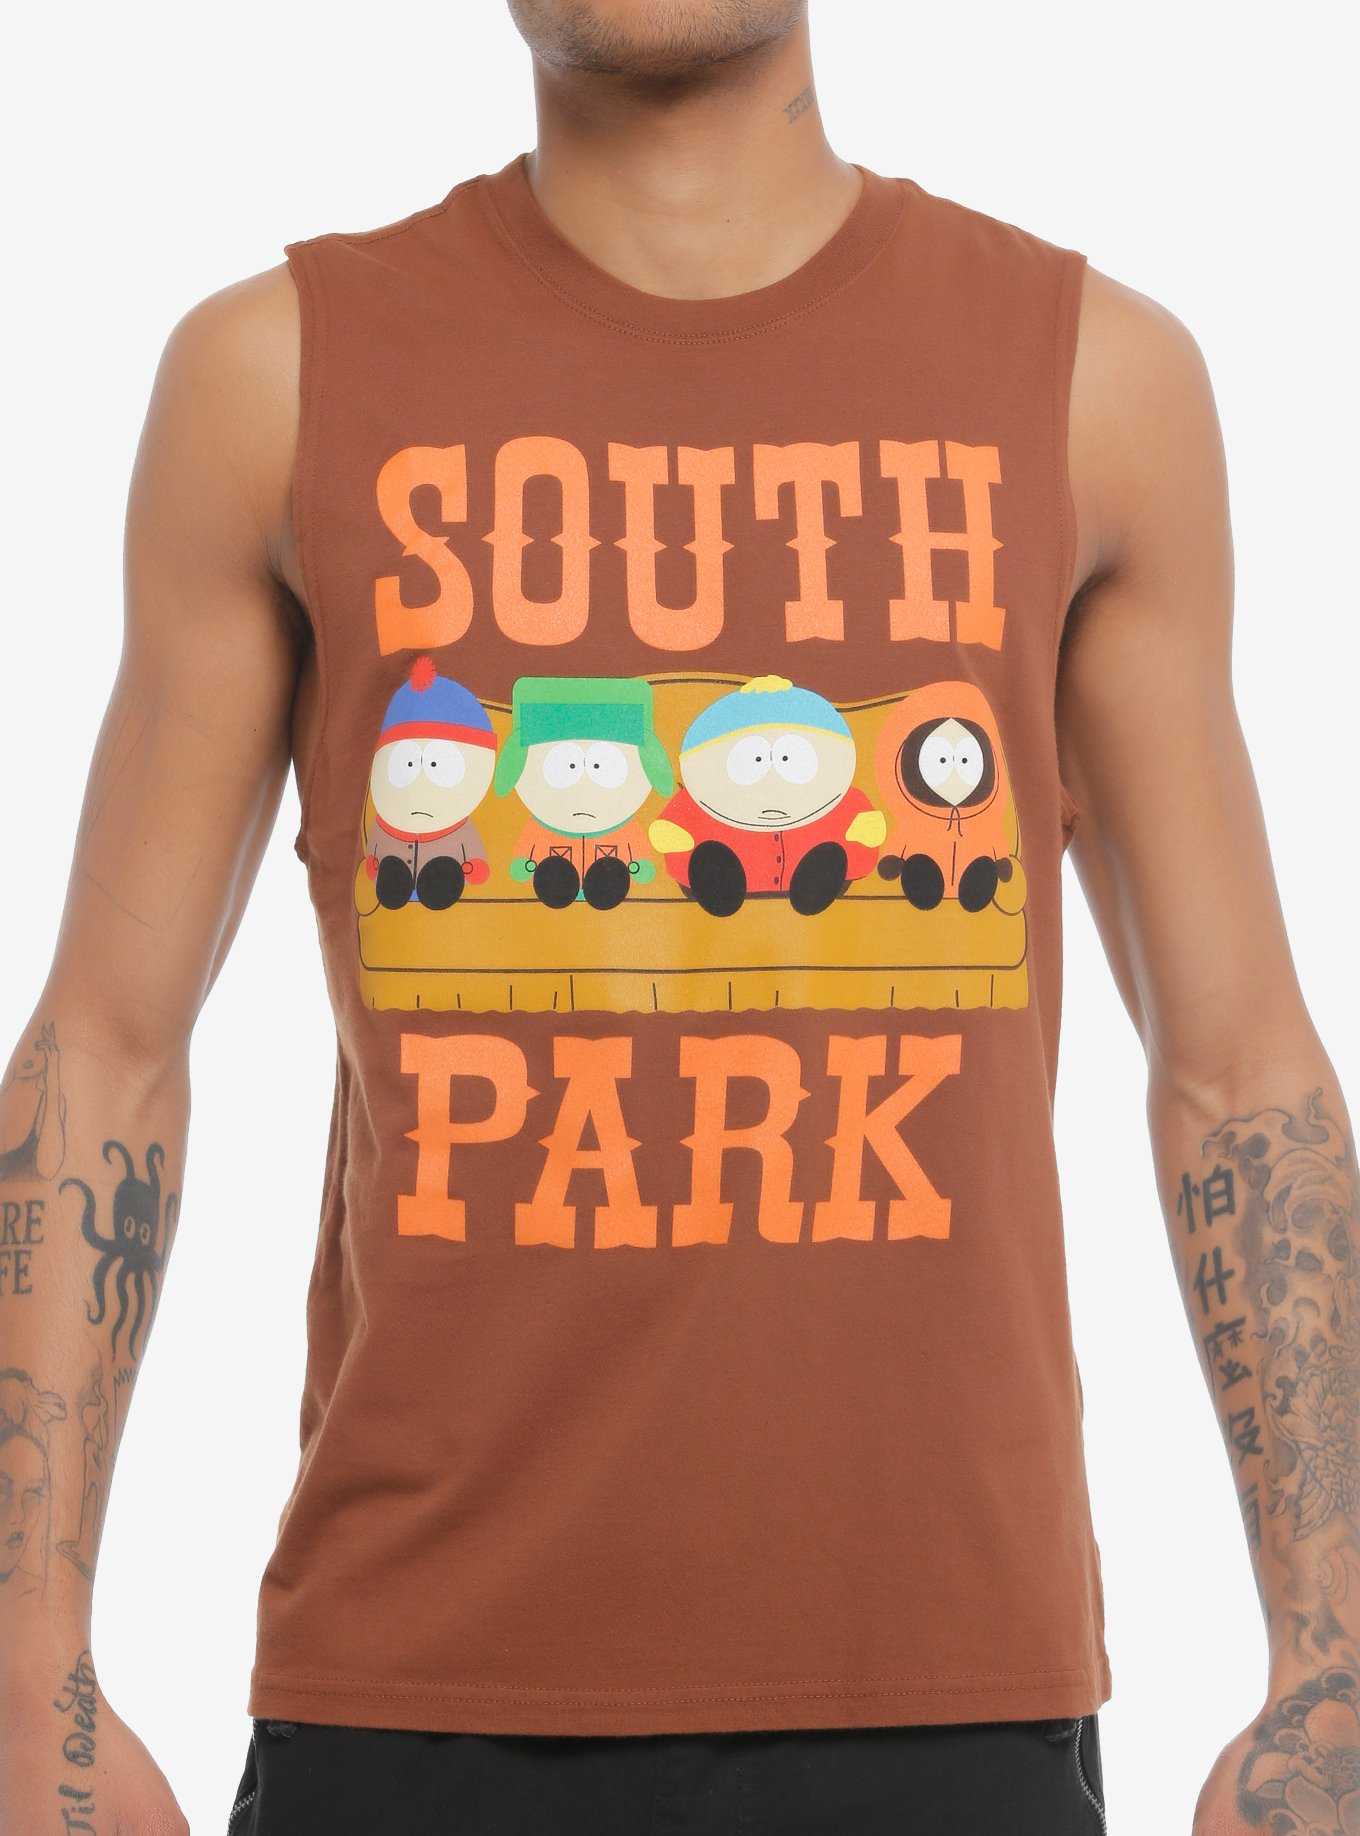 OFFICIAL South Park Merch, Shirts & Gifts